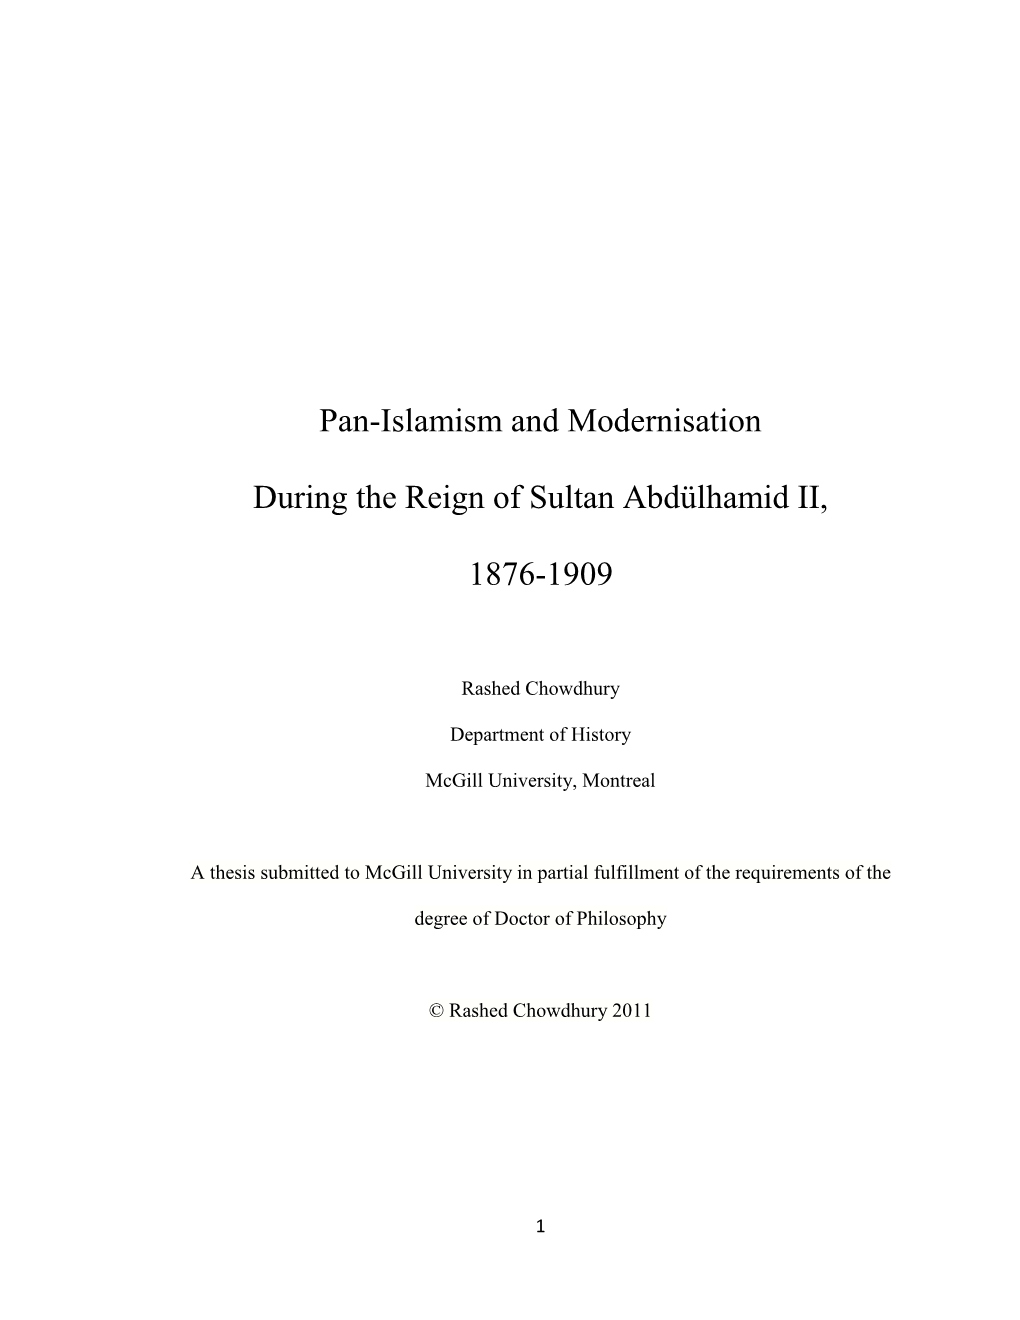 Pan-Islamism and Modernisation During the Reign of Sultan